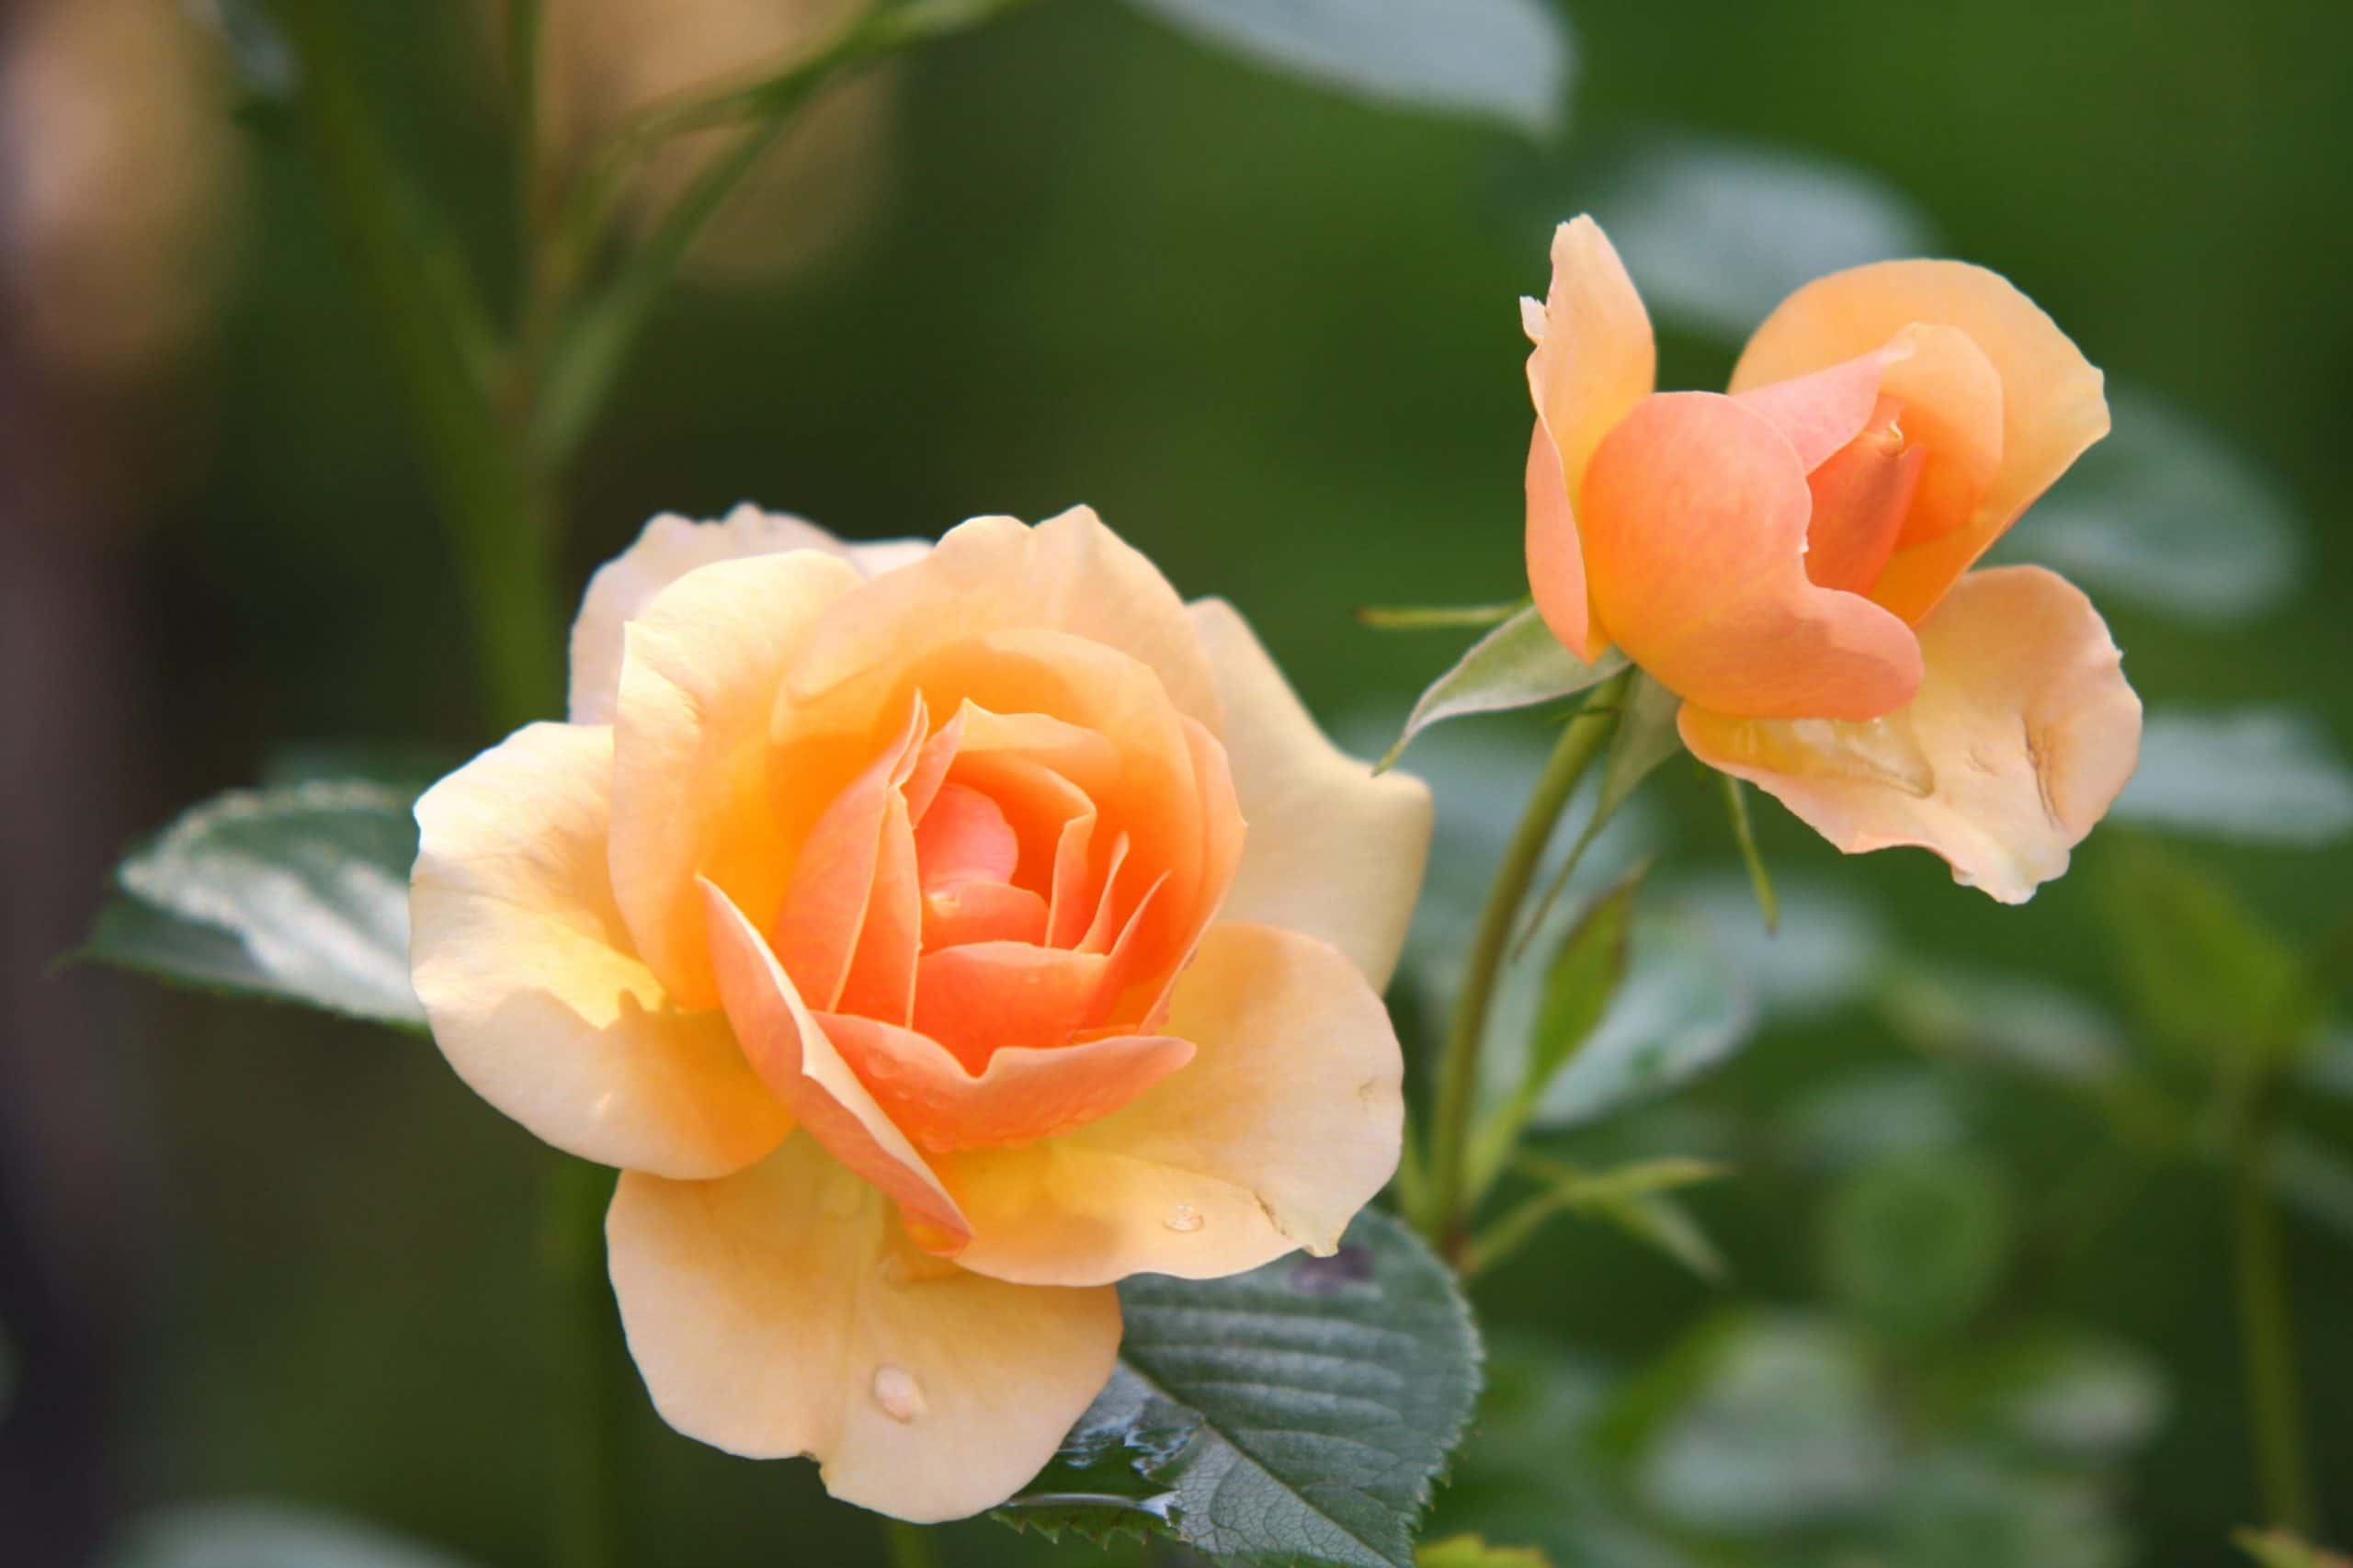 When to plant rose bushes in the garden?